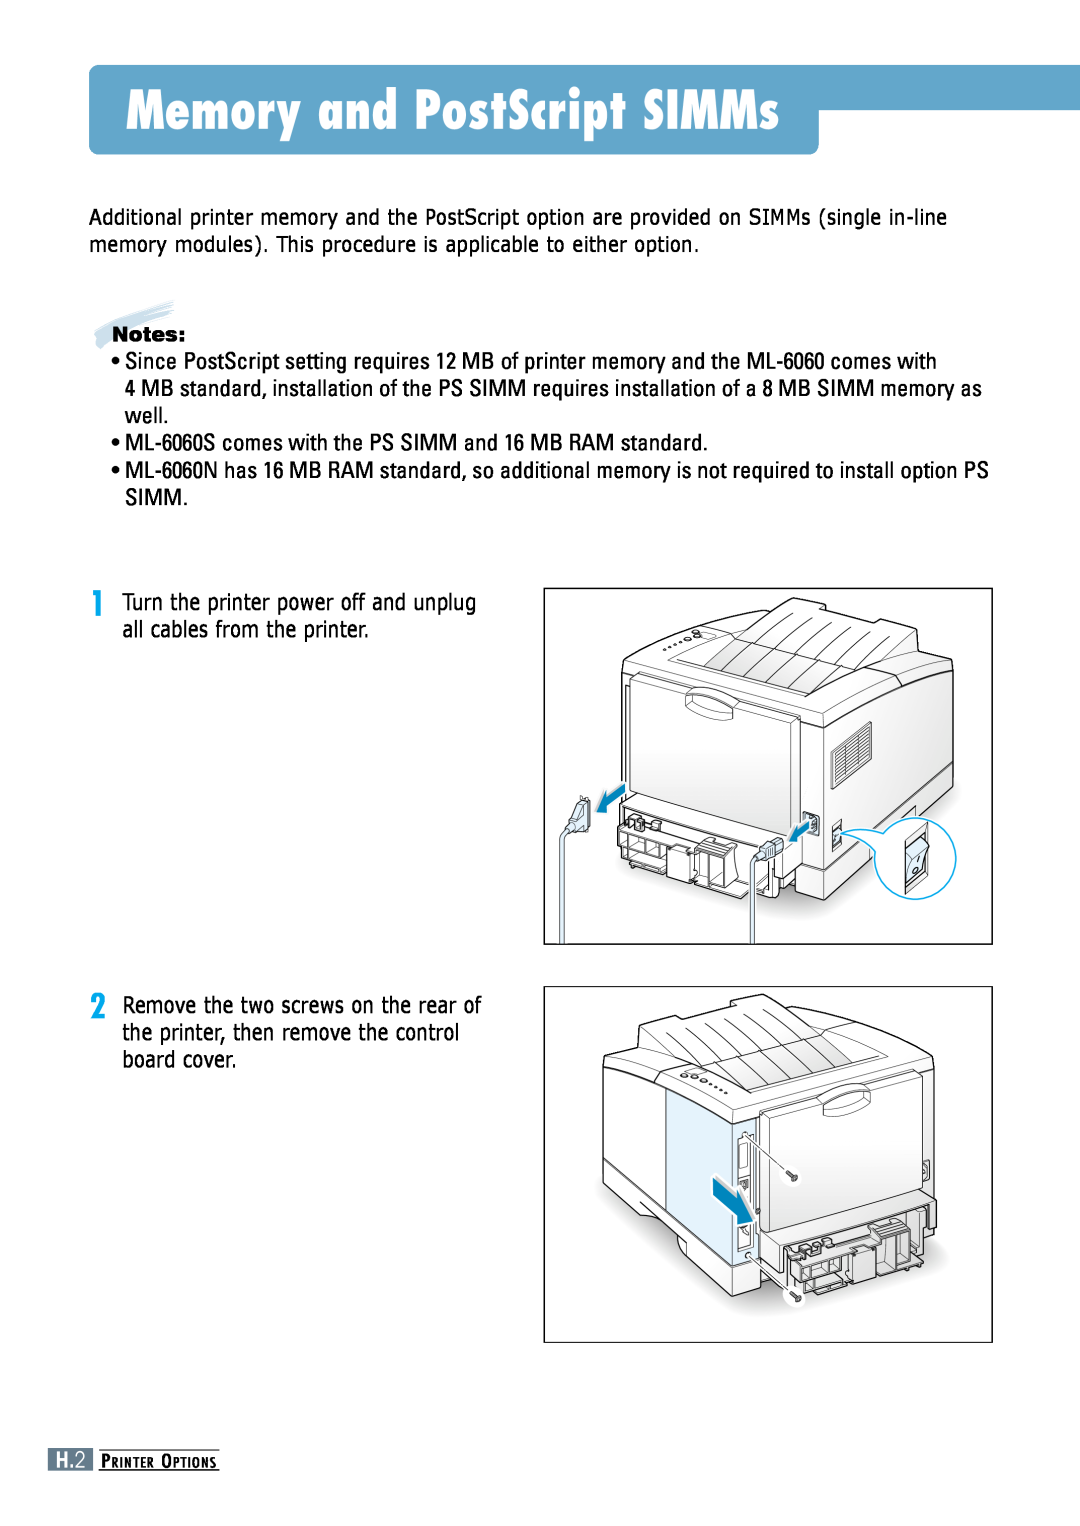 Samsung ML-6060S manual Memory and PostScript SIMMs, Turn the printer power off and unplug all cables from the printer 